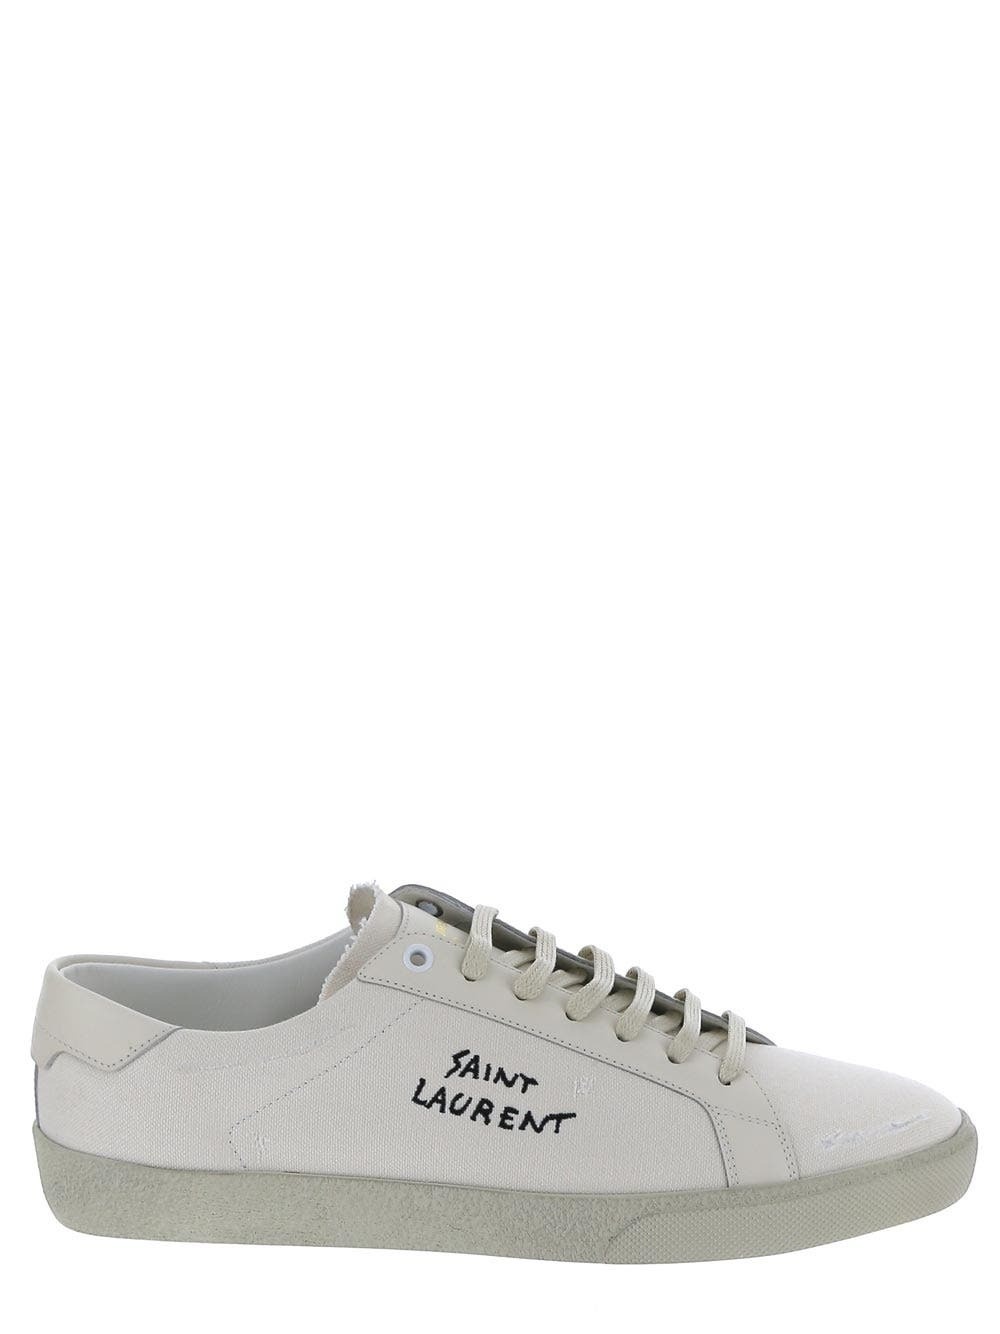 Photo: Court Classic Sl/06 Embroidered Sneakers